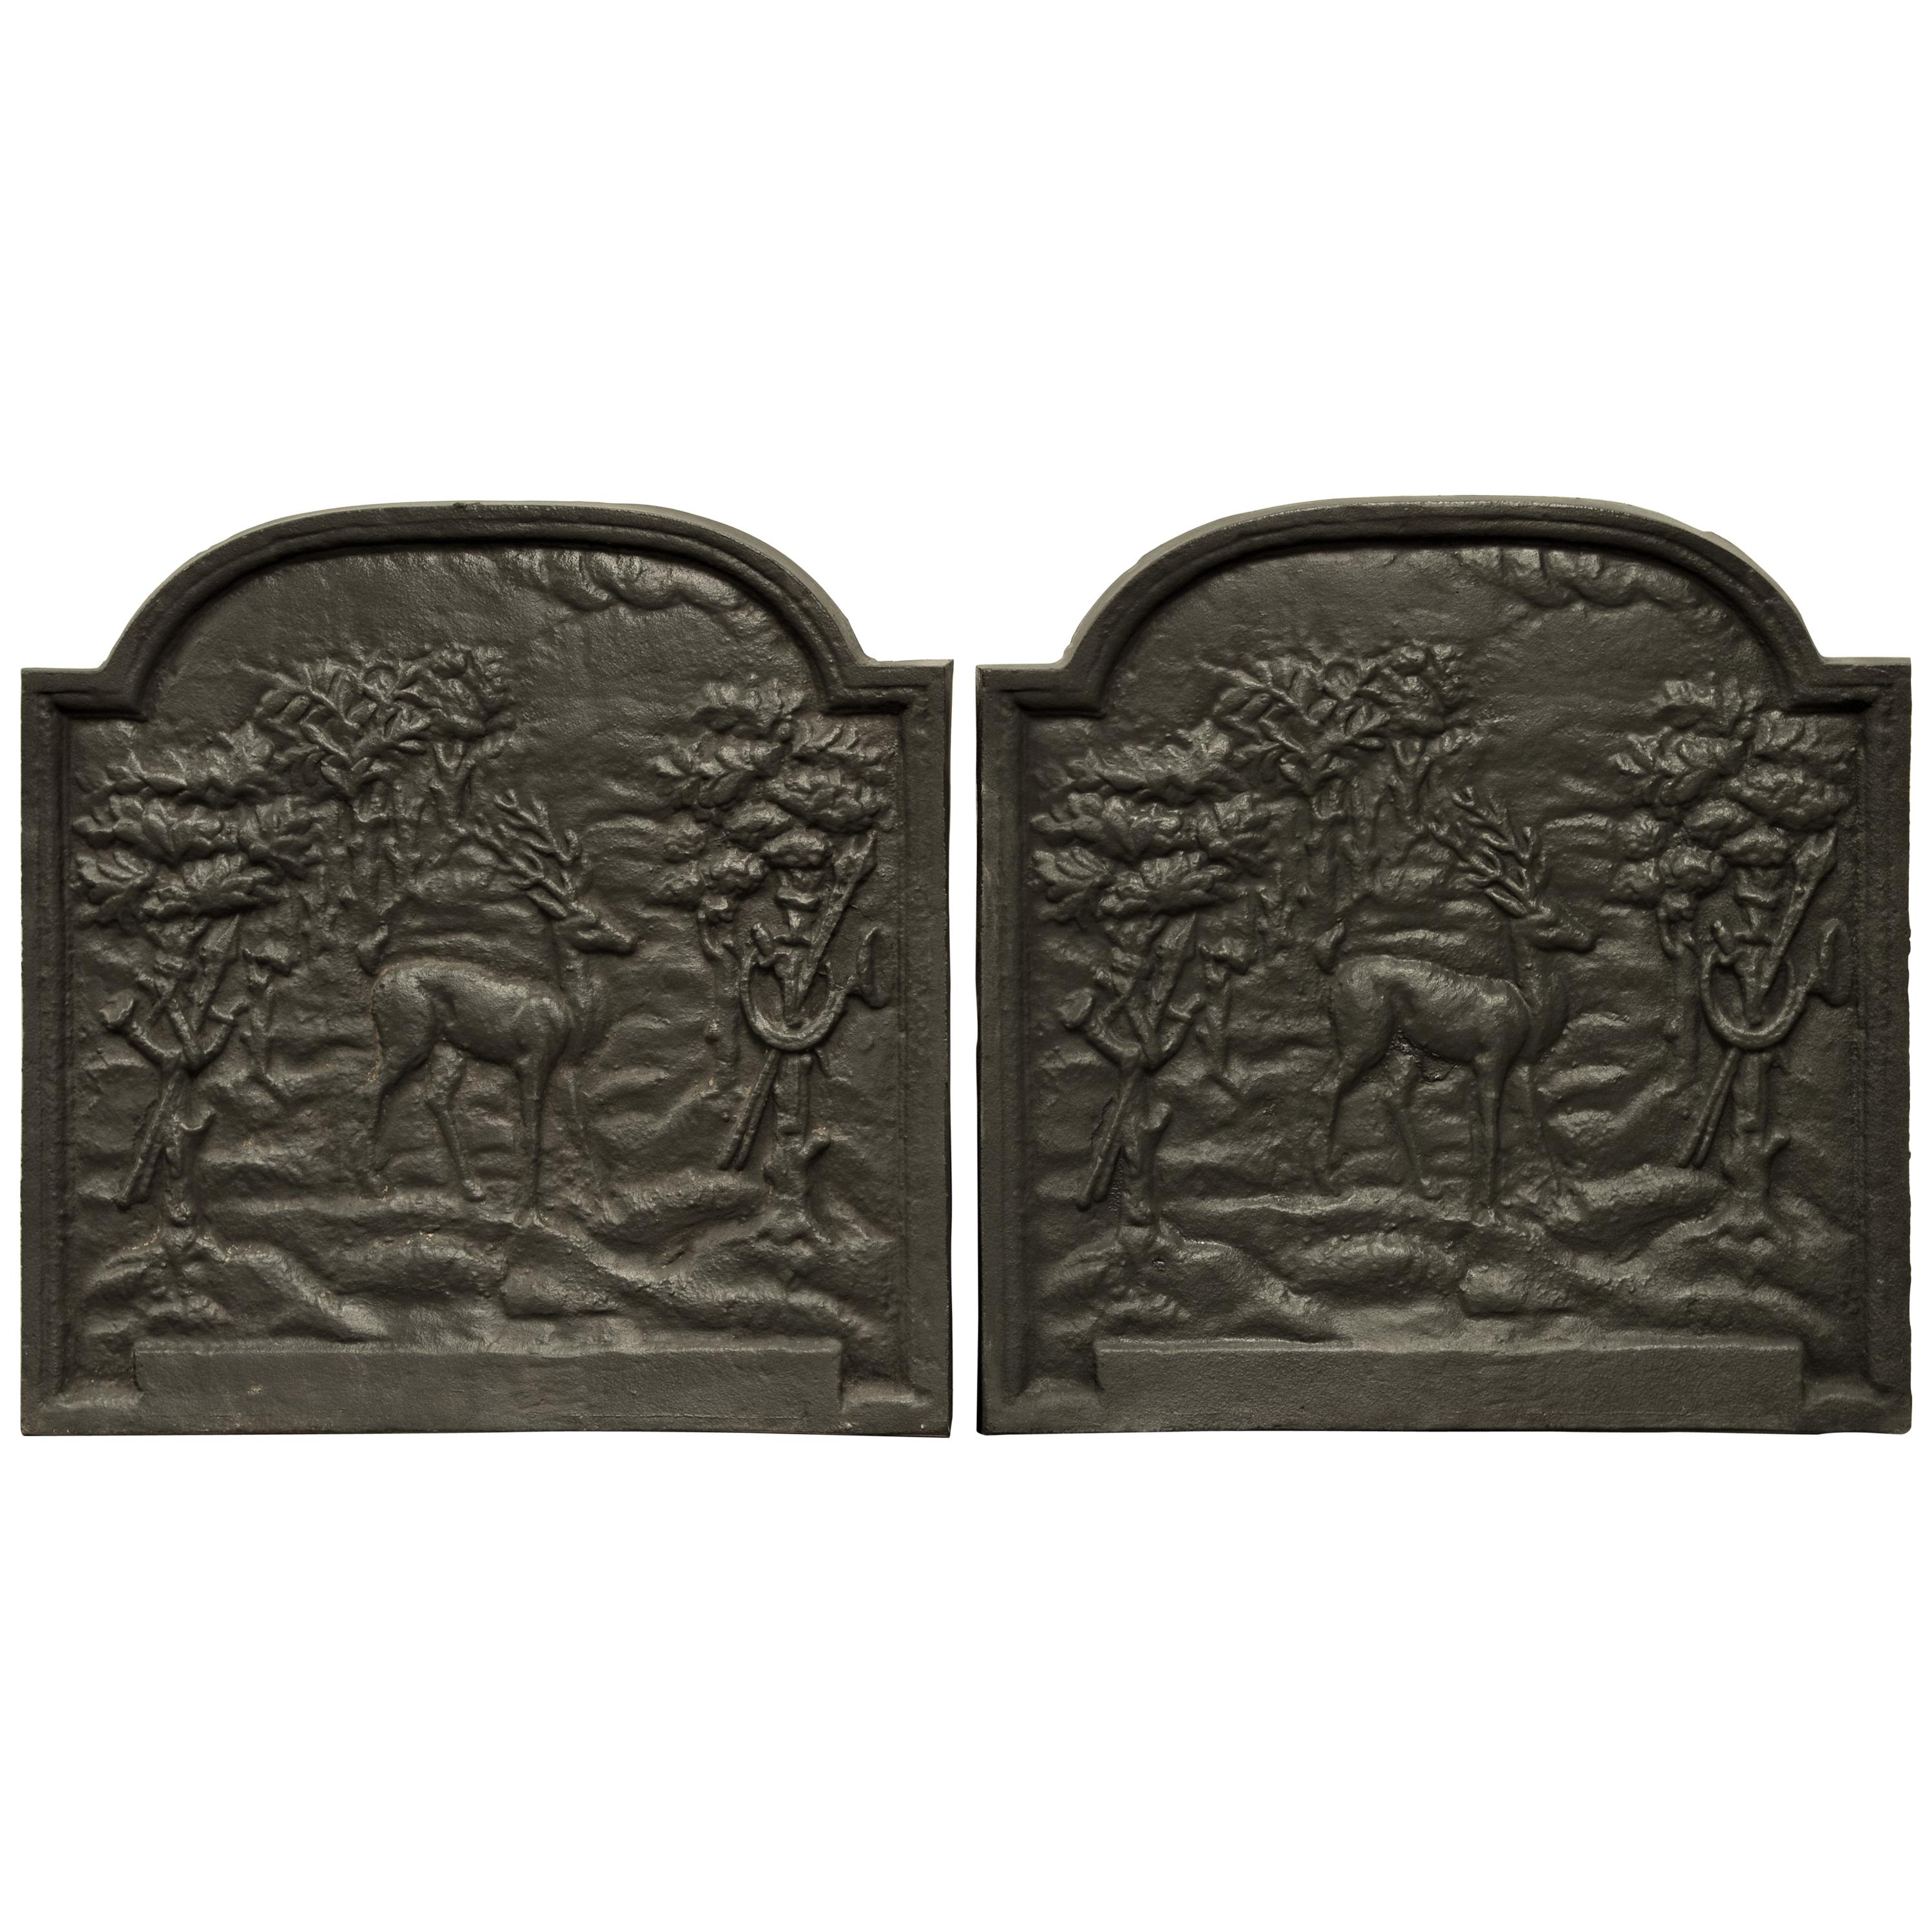 Pair of Cast Iron Firebacks Showing Deers in the Woods